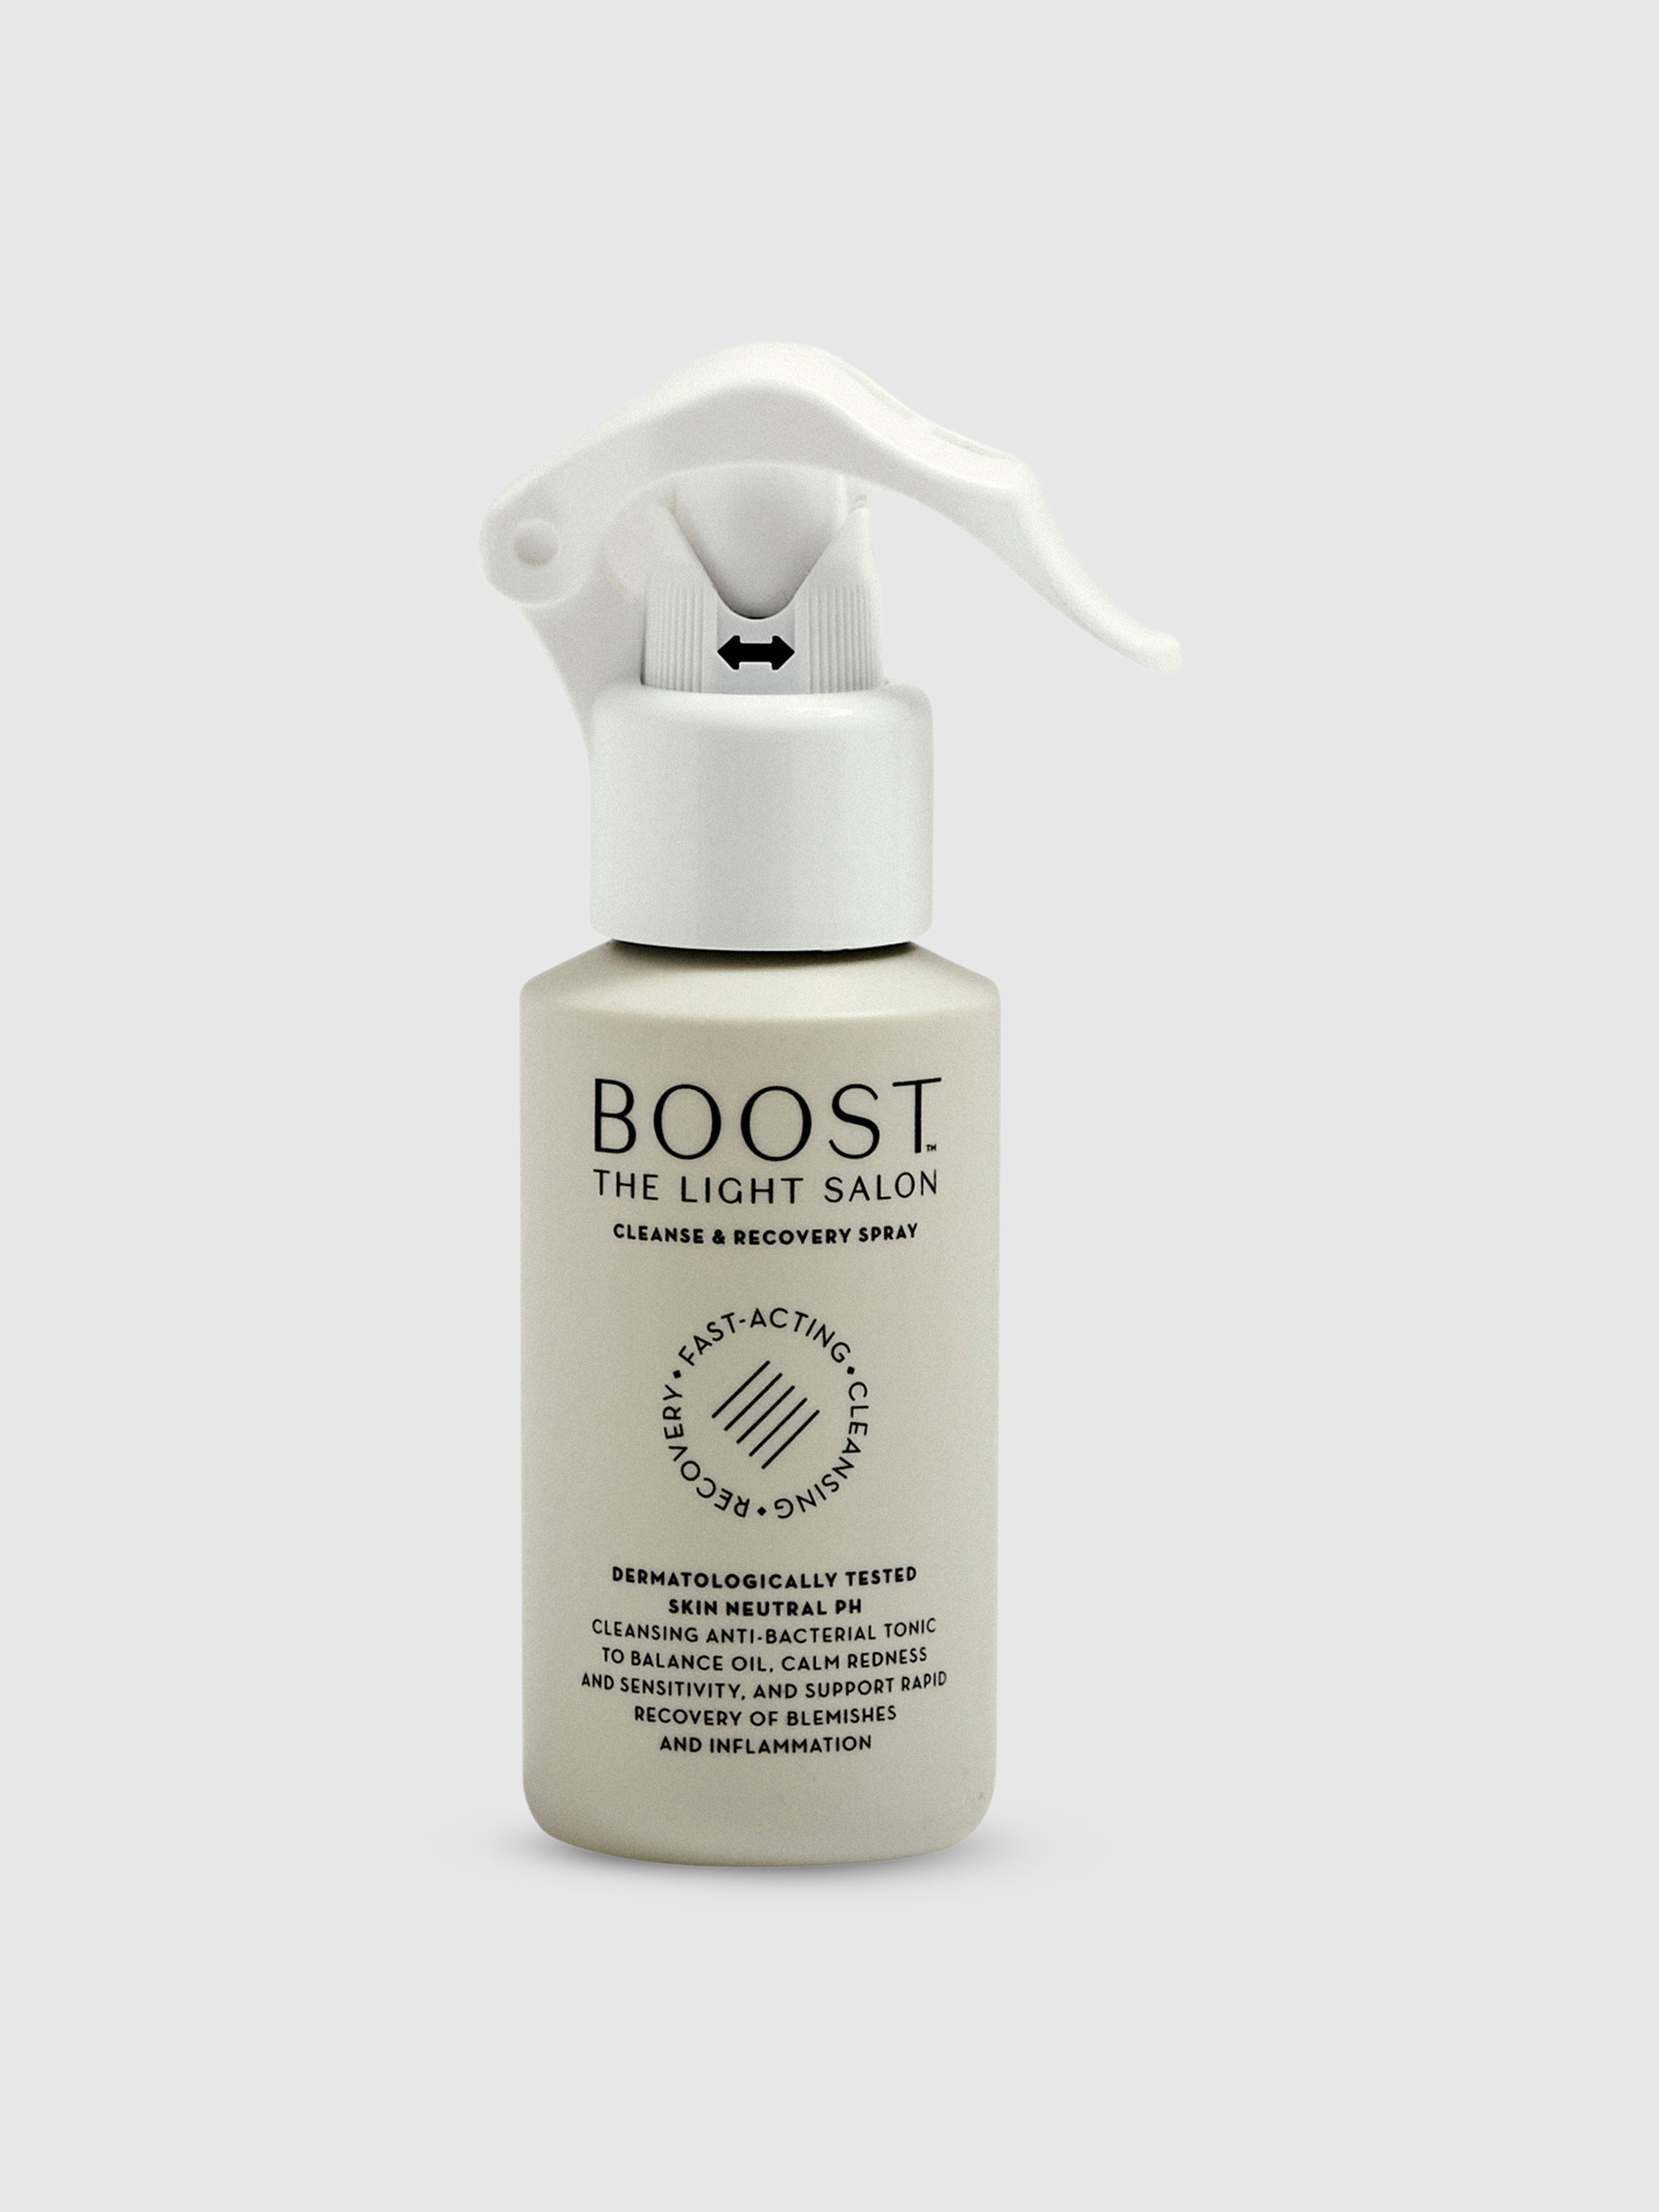 THE LIGHT SALON THE LIGHT SALON THE LIGHT SALON BOOST CLEANSE & RECOVERY SPRAY